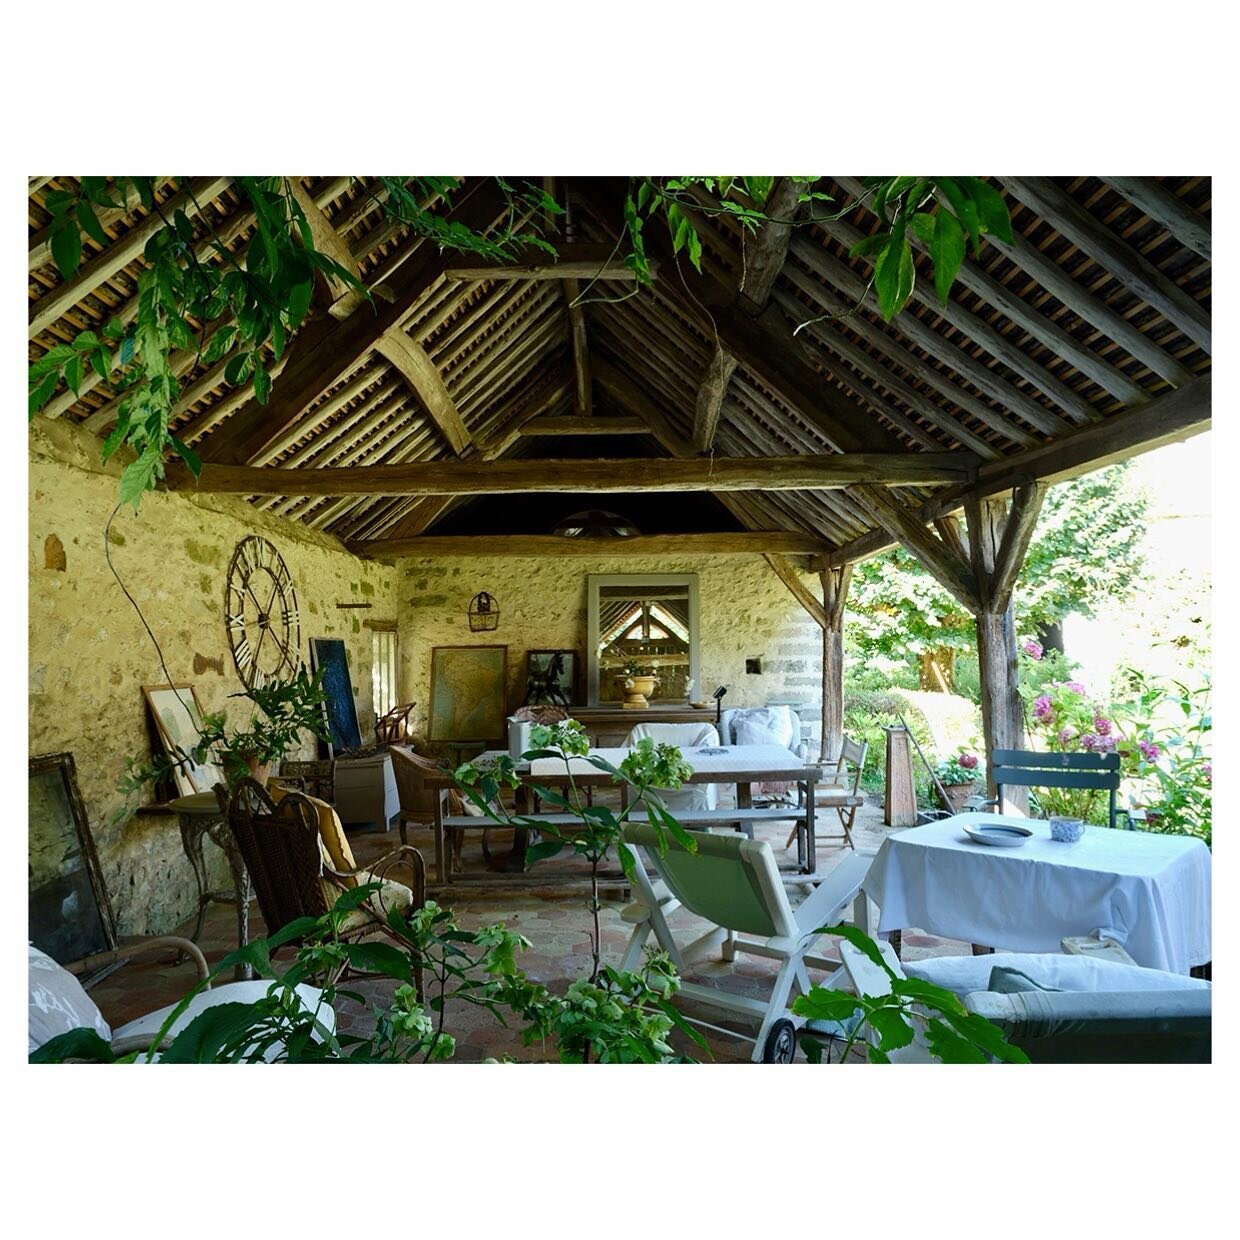 &bull; inside/outside living

#porch #veranda #insideoutside #countryhome #countryhouse #architecture #interiordesign #countryliving #countryside #campagne #countryfication 

Pic by @nathaliemohadjer for &bdquo;Campagne. Pour un nouvel art de vivre.&